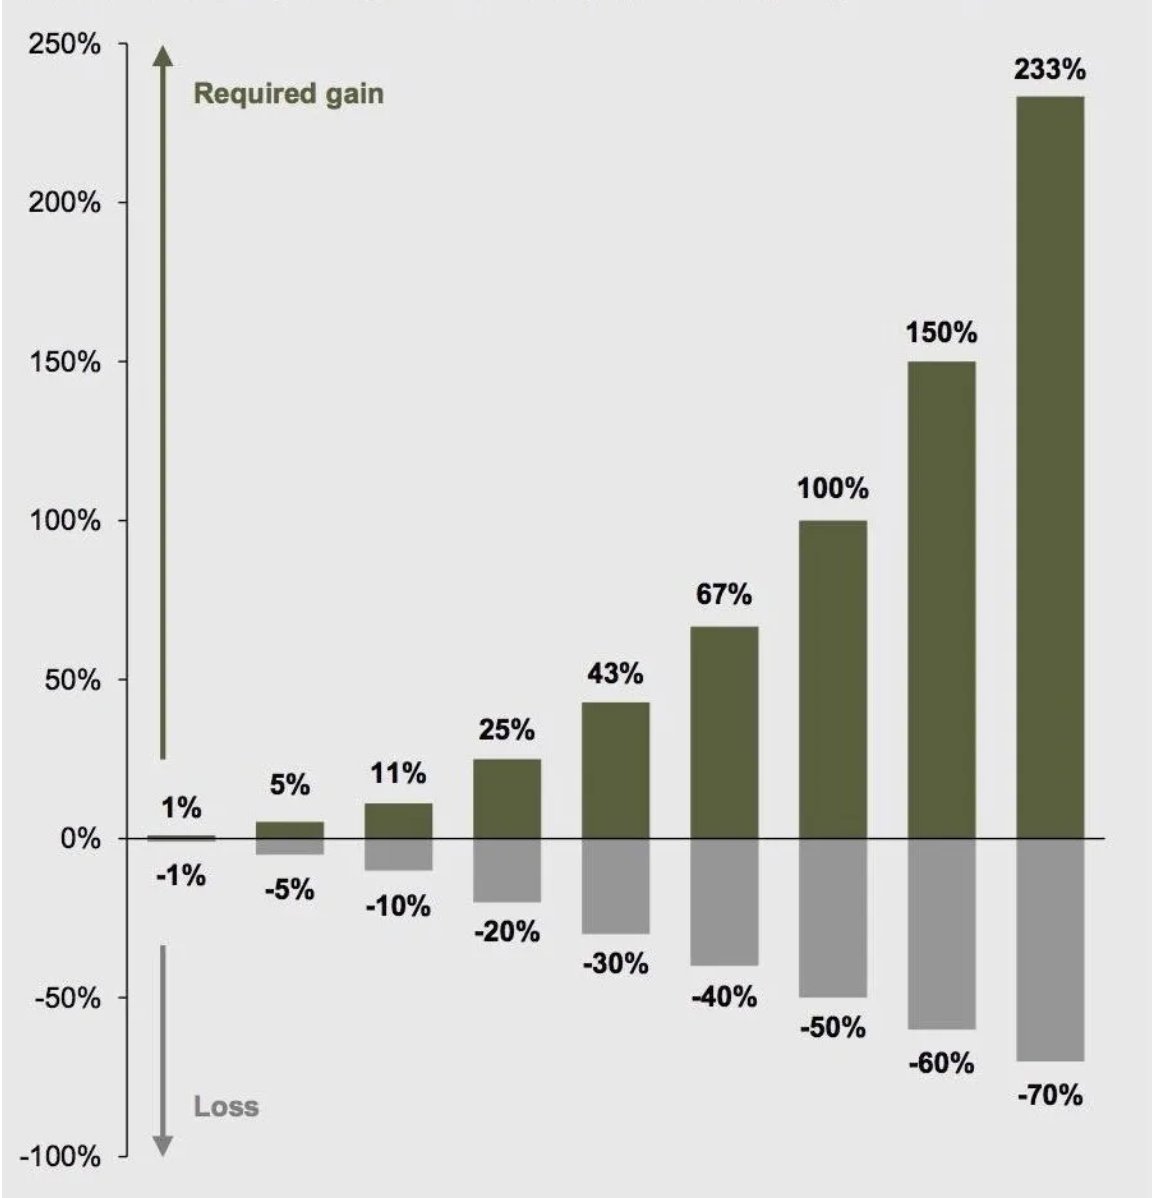 @FoundersPodcast @naval 7. Percentage gains needed to recover from a loss: